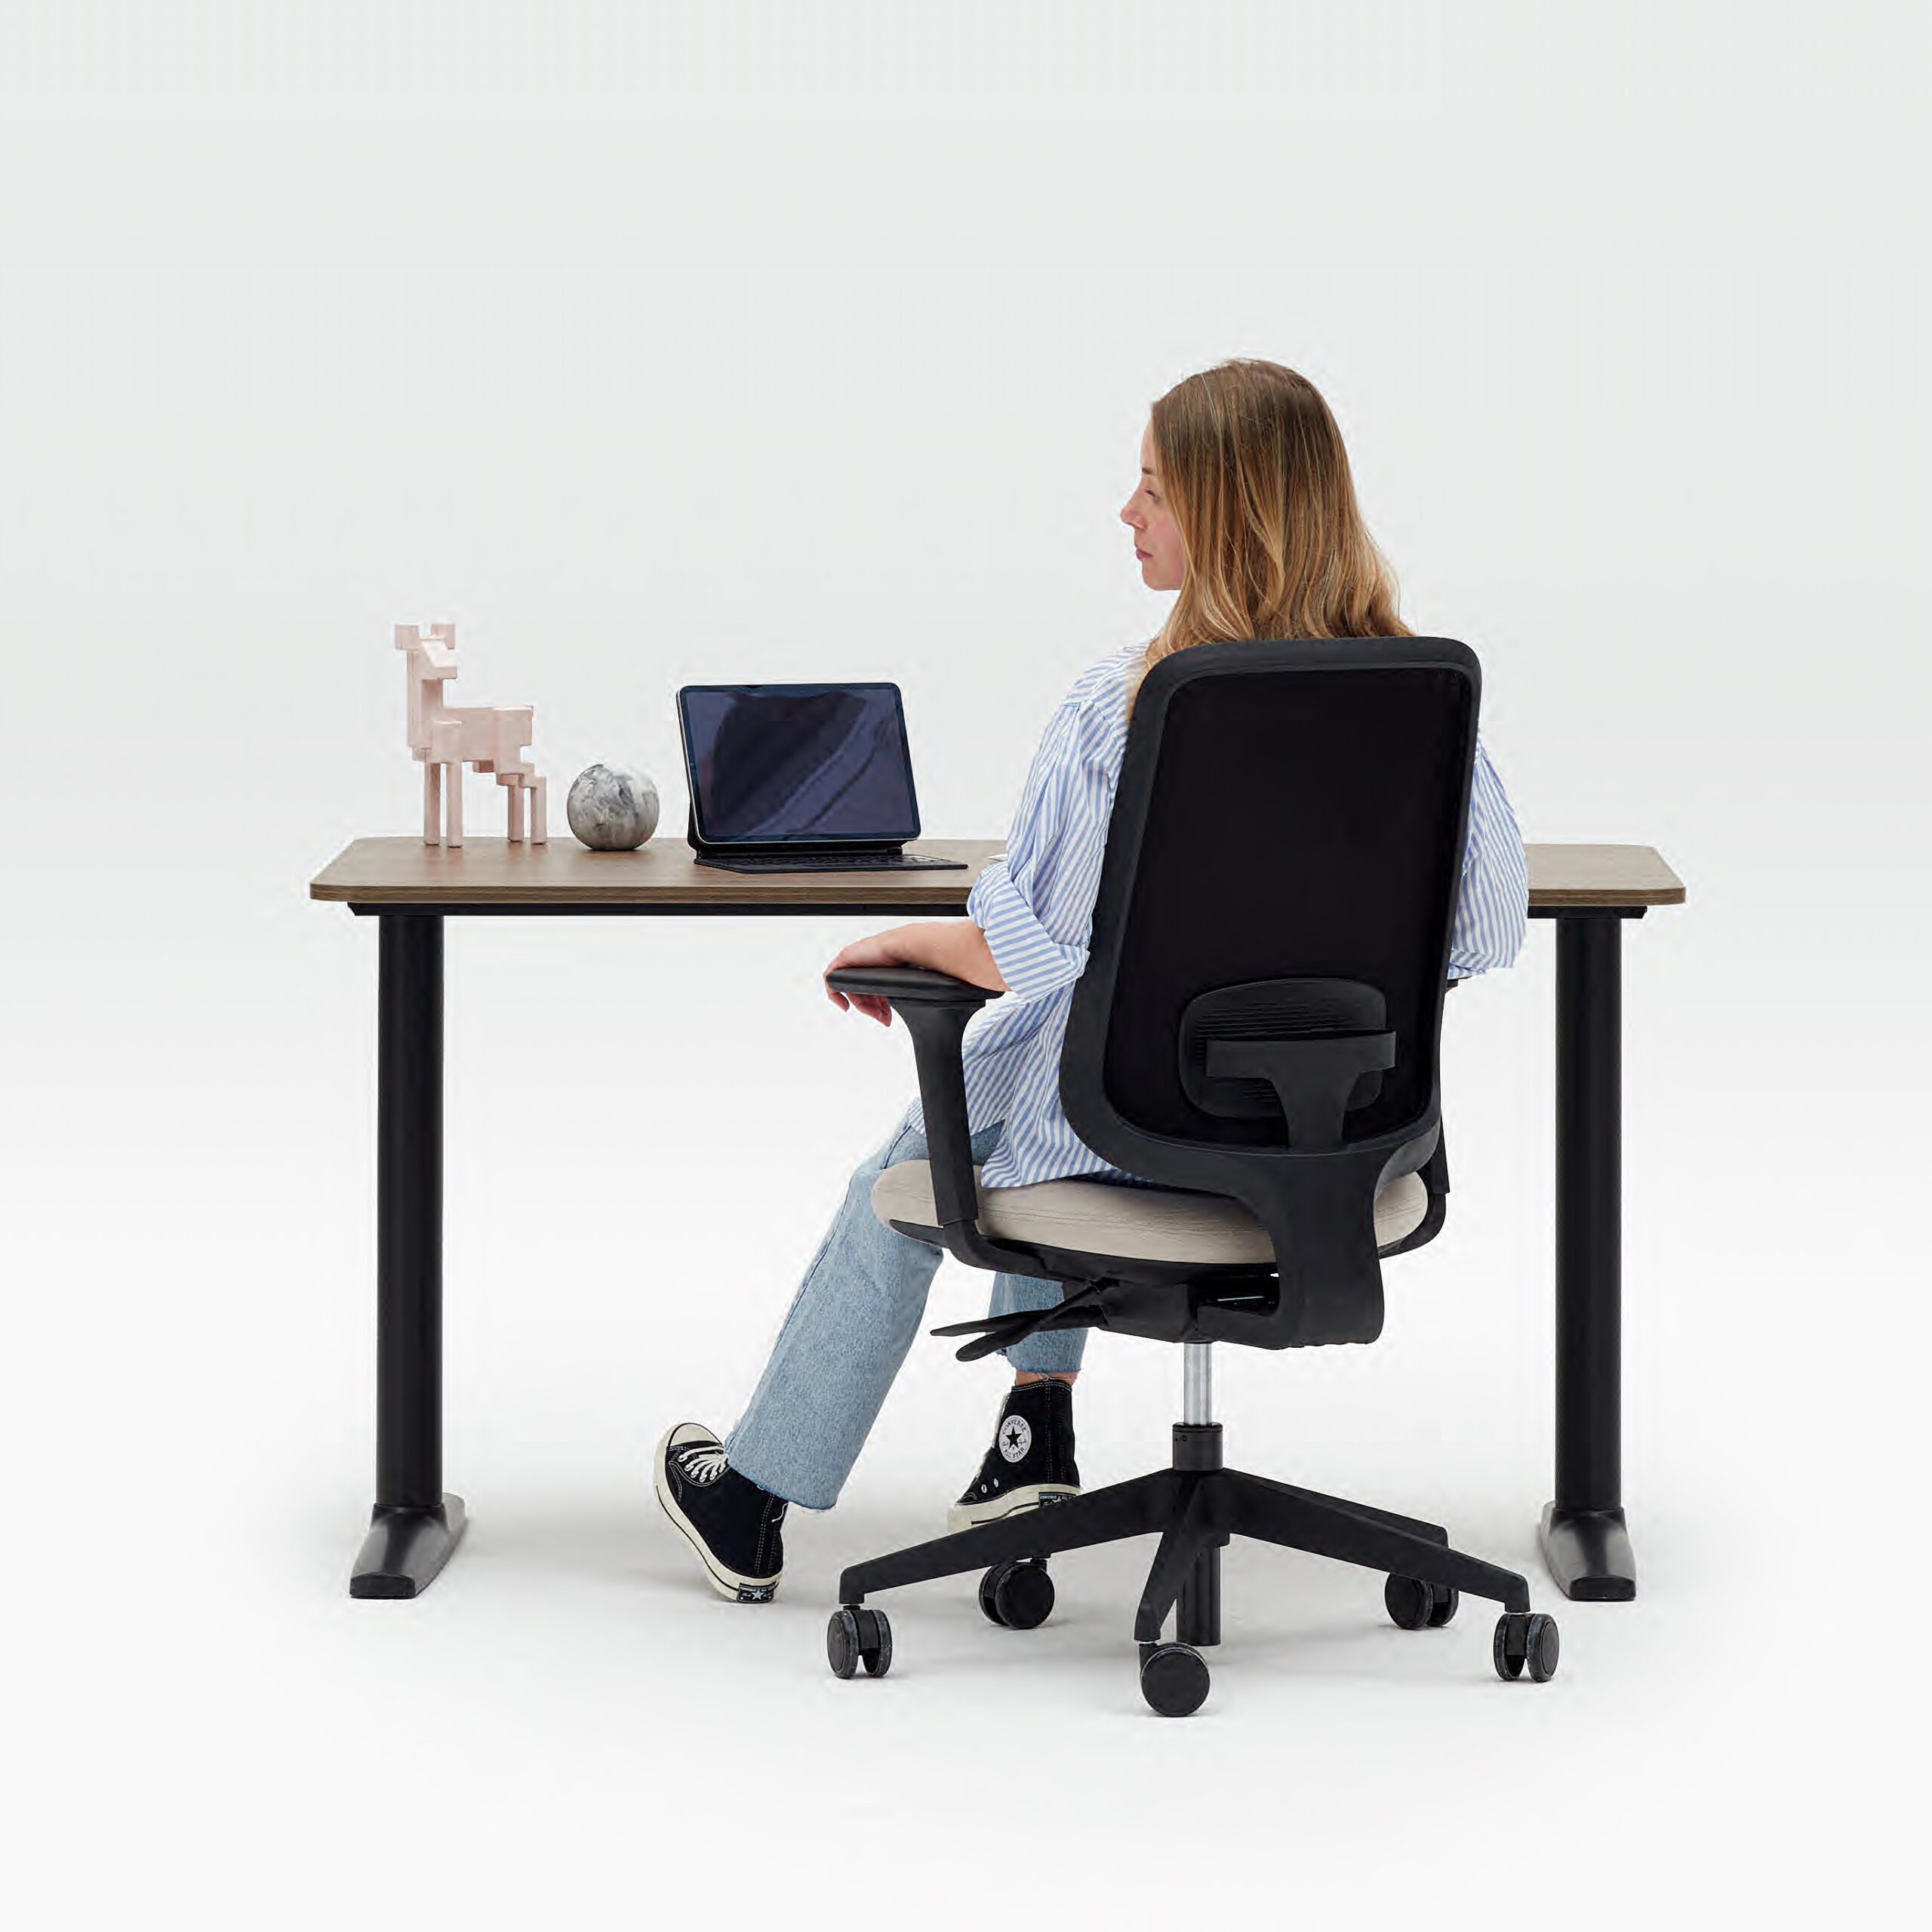 The Back Of A Person Sitting On A Task One Office Chair At A Fixed Height Desk With Their Laptop And Accessories On It